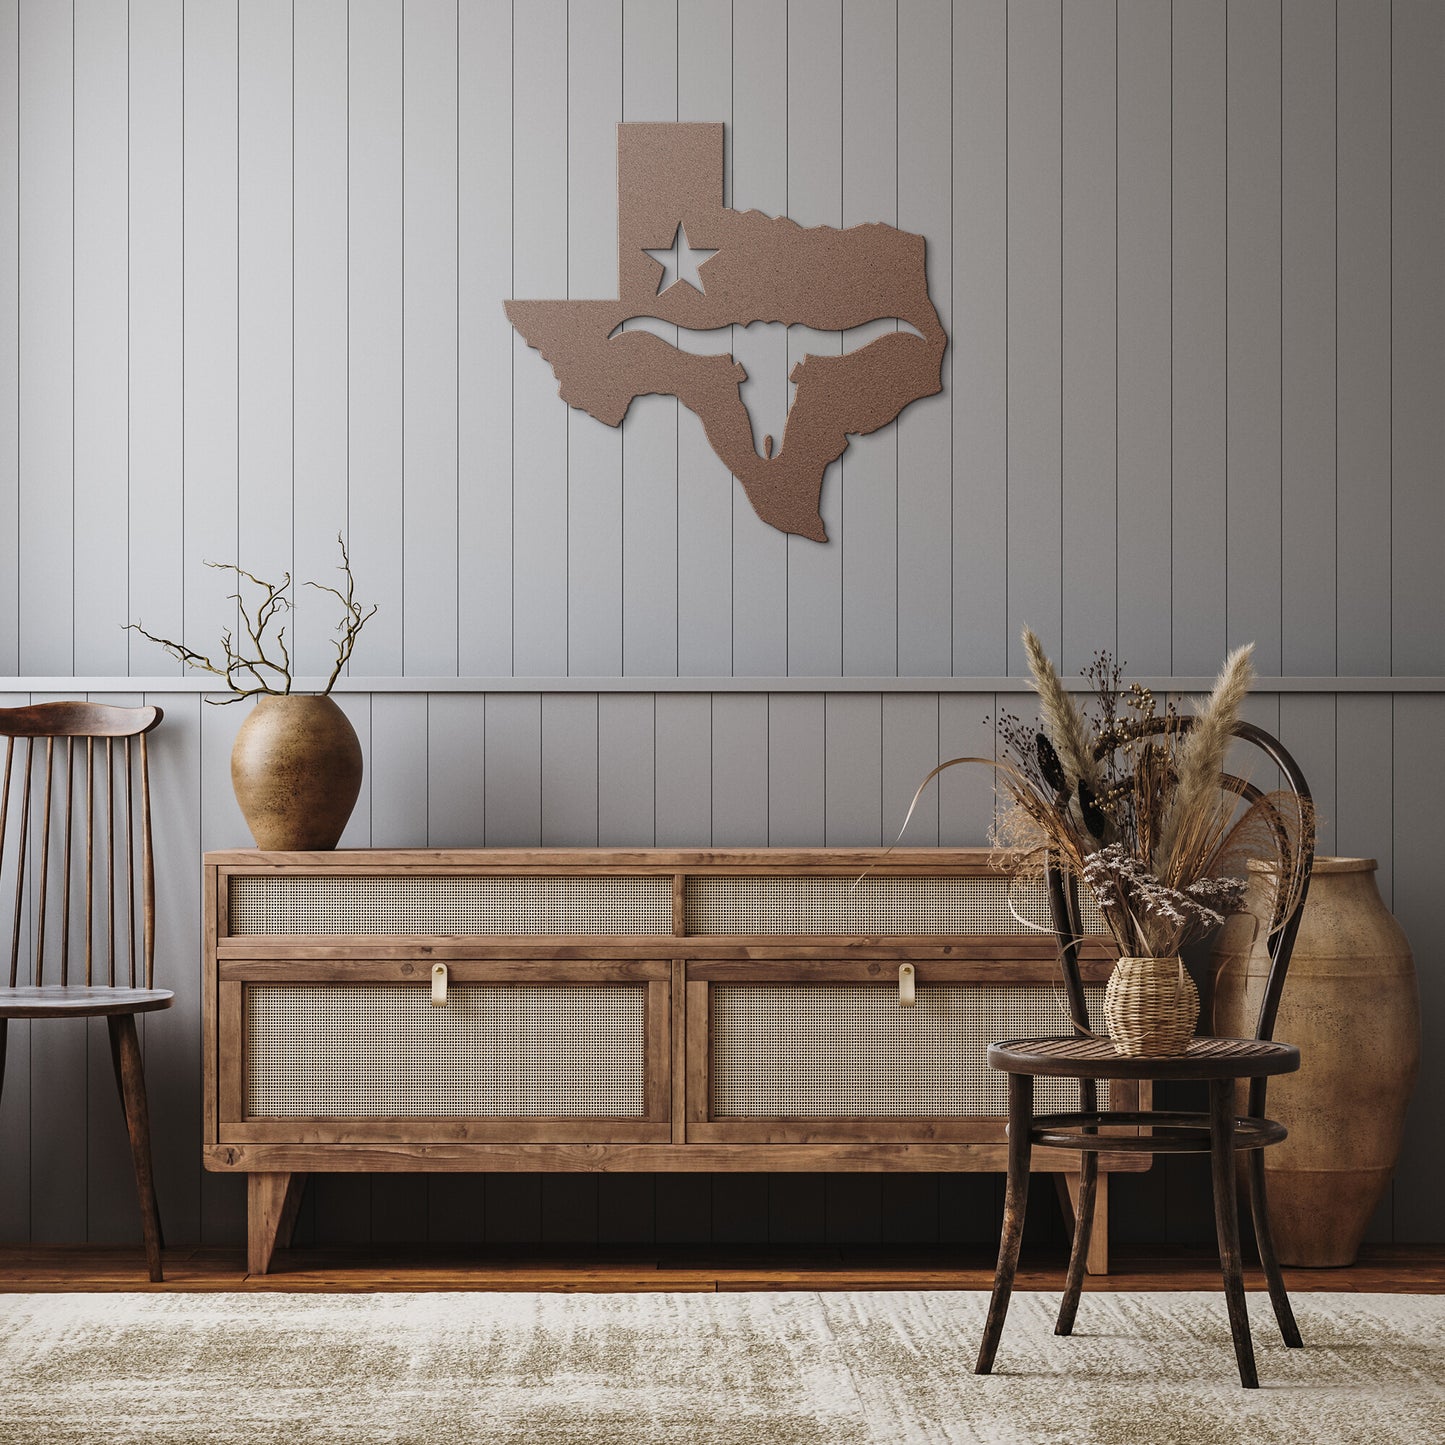 The Lone Star State Texas Metal Art